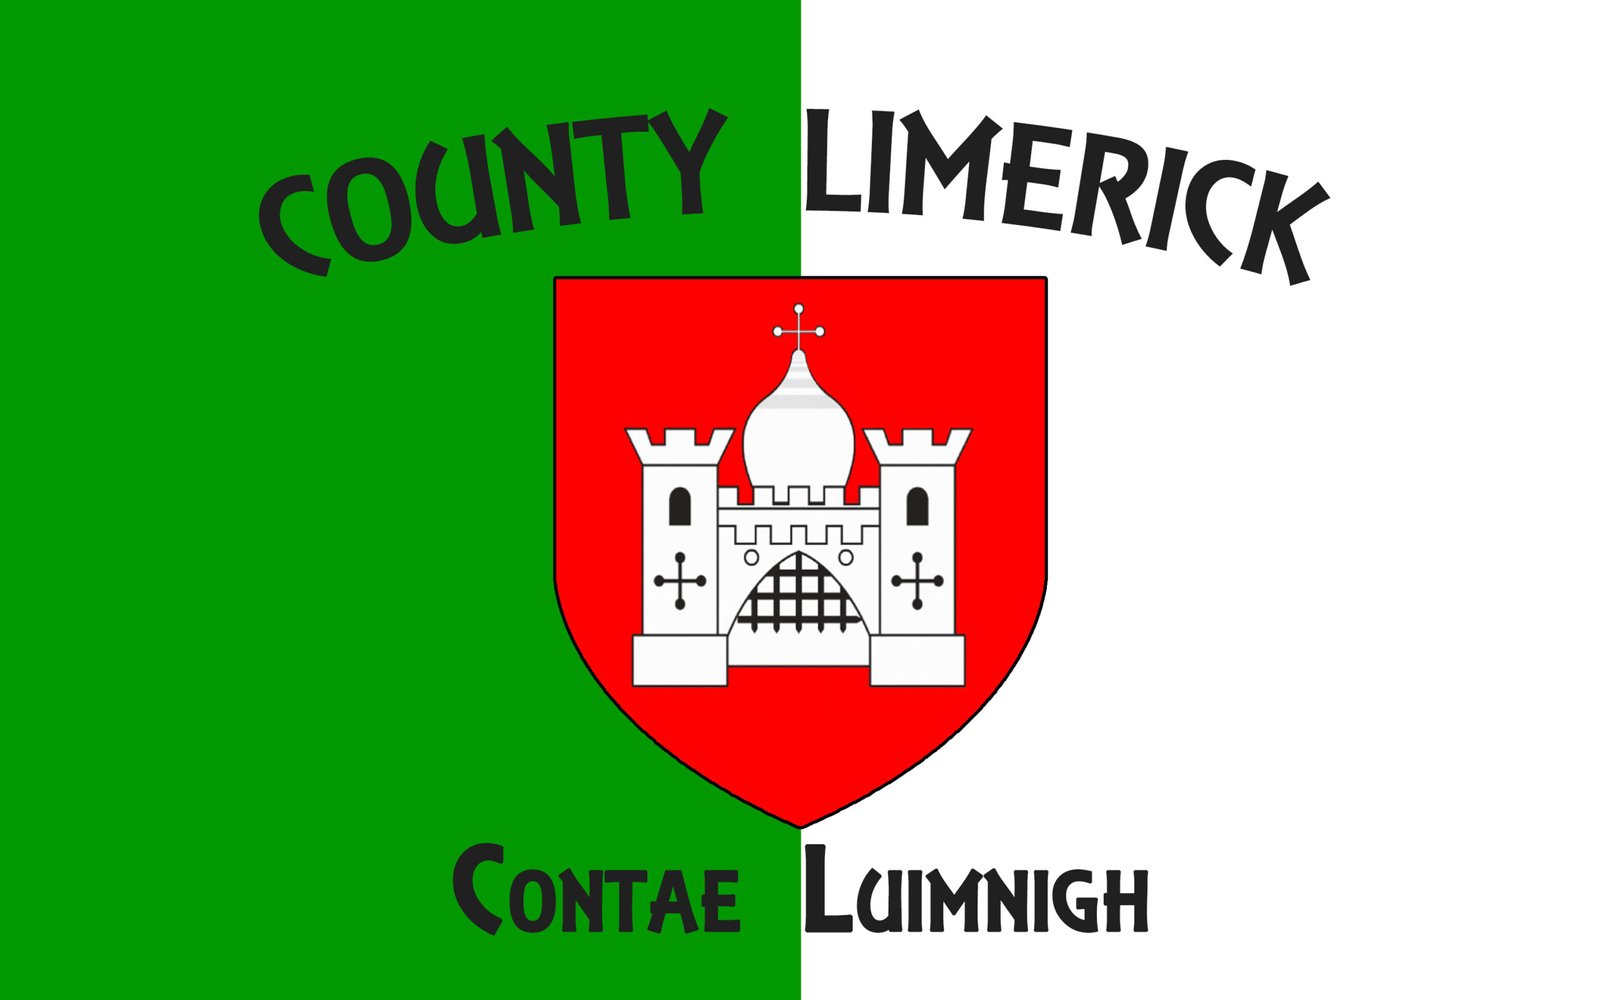 Flag of County Limerick is a county in Ireland. It is located in the province of Munster, and is also part of the Mid-West Region. Limerick City and County Council is the local council for the county.